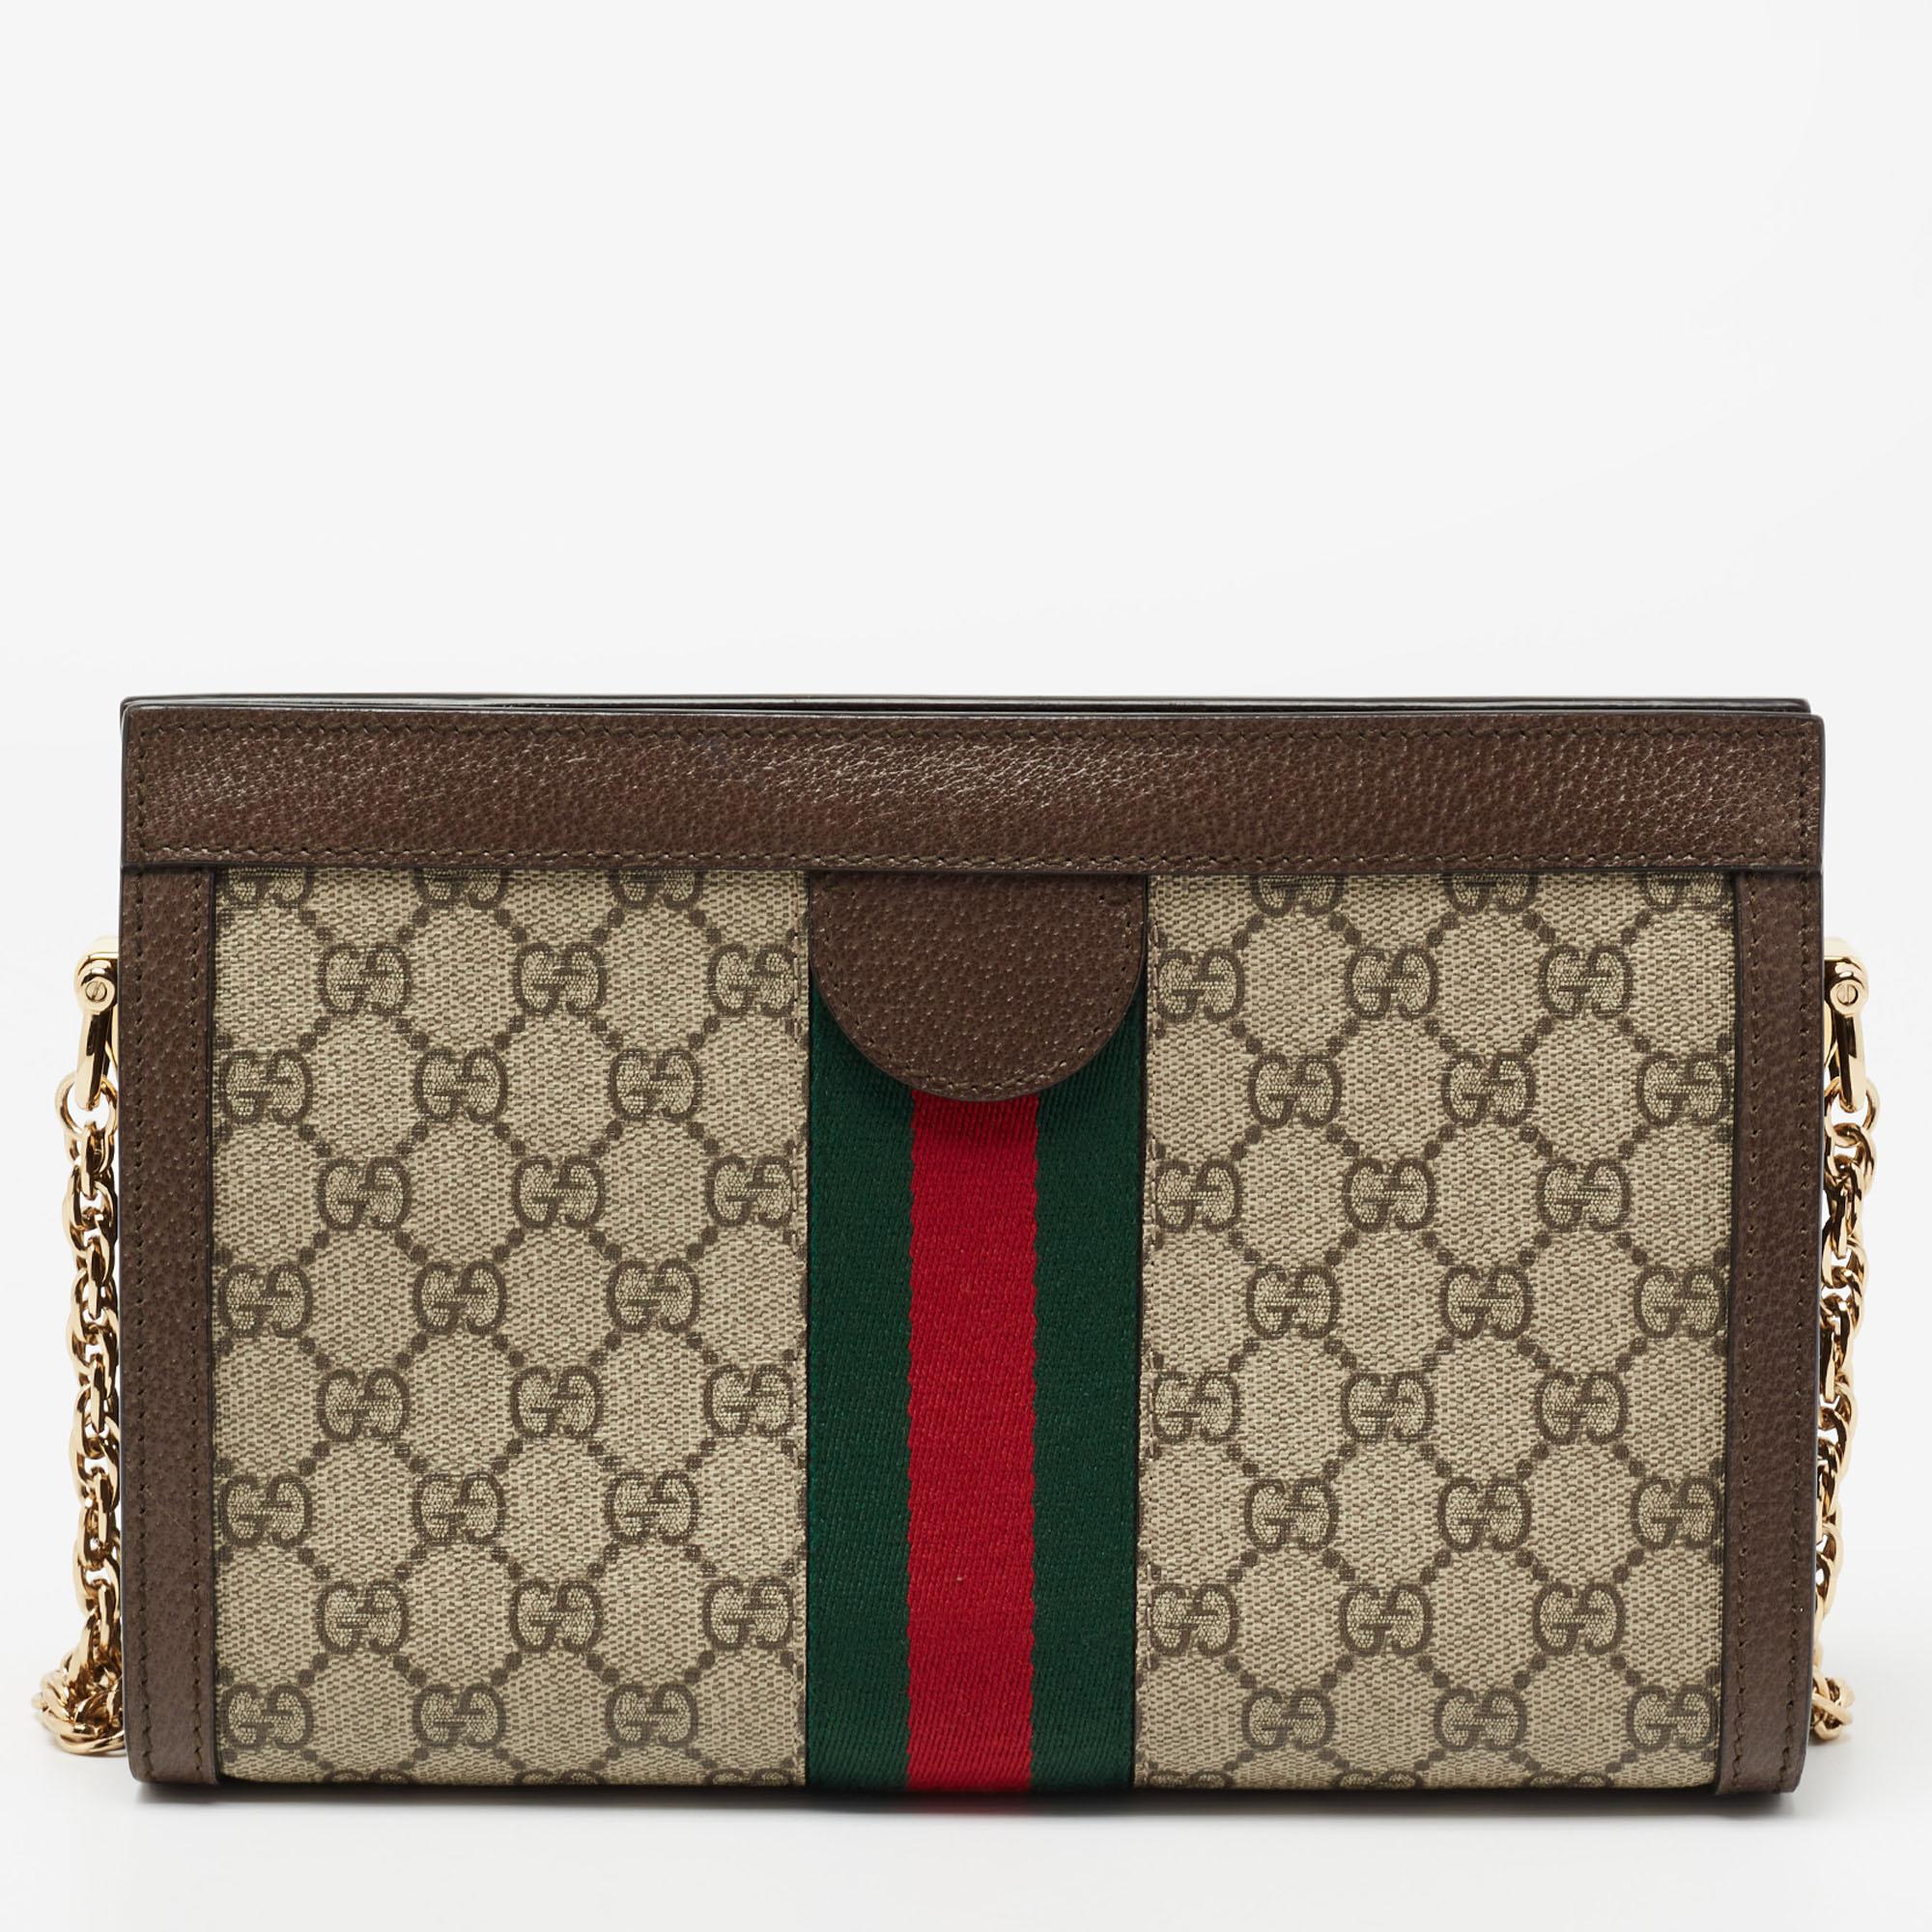 The signature Web stripe on this Gucci bag shows the brand's love for traditions and innovations. Crafted from the GG supreme canvas with leather trims, it is equipped with a chainlink shoulder strap and a GG motif on the front. The satin-lined